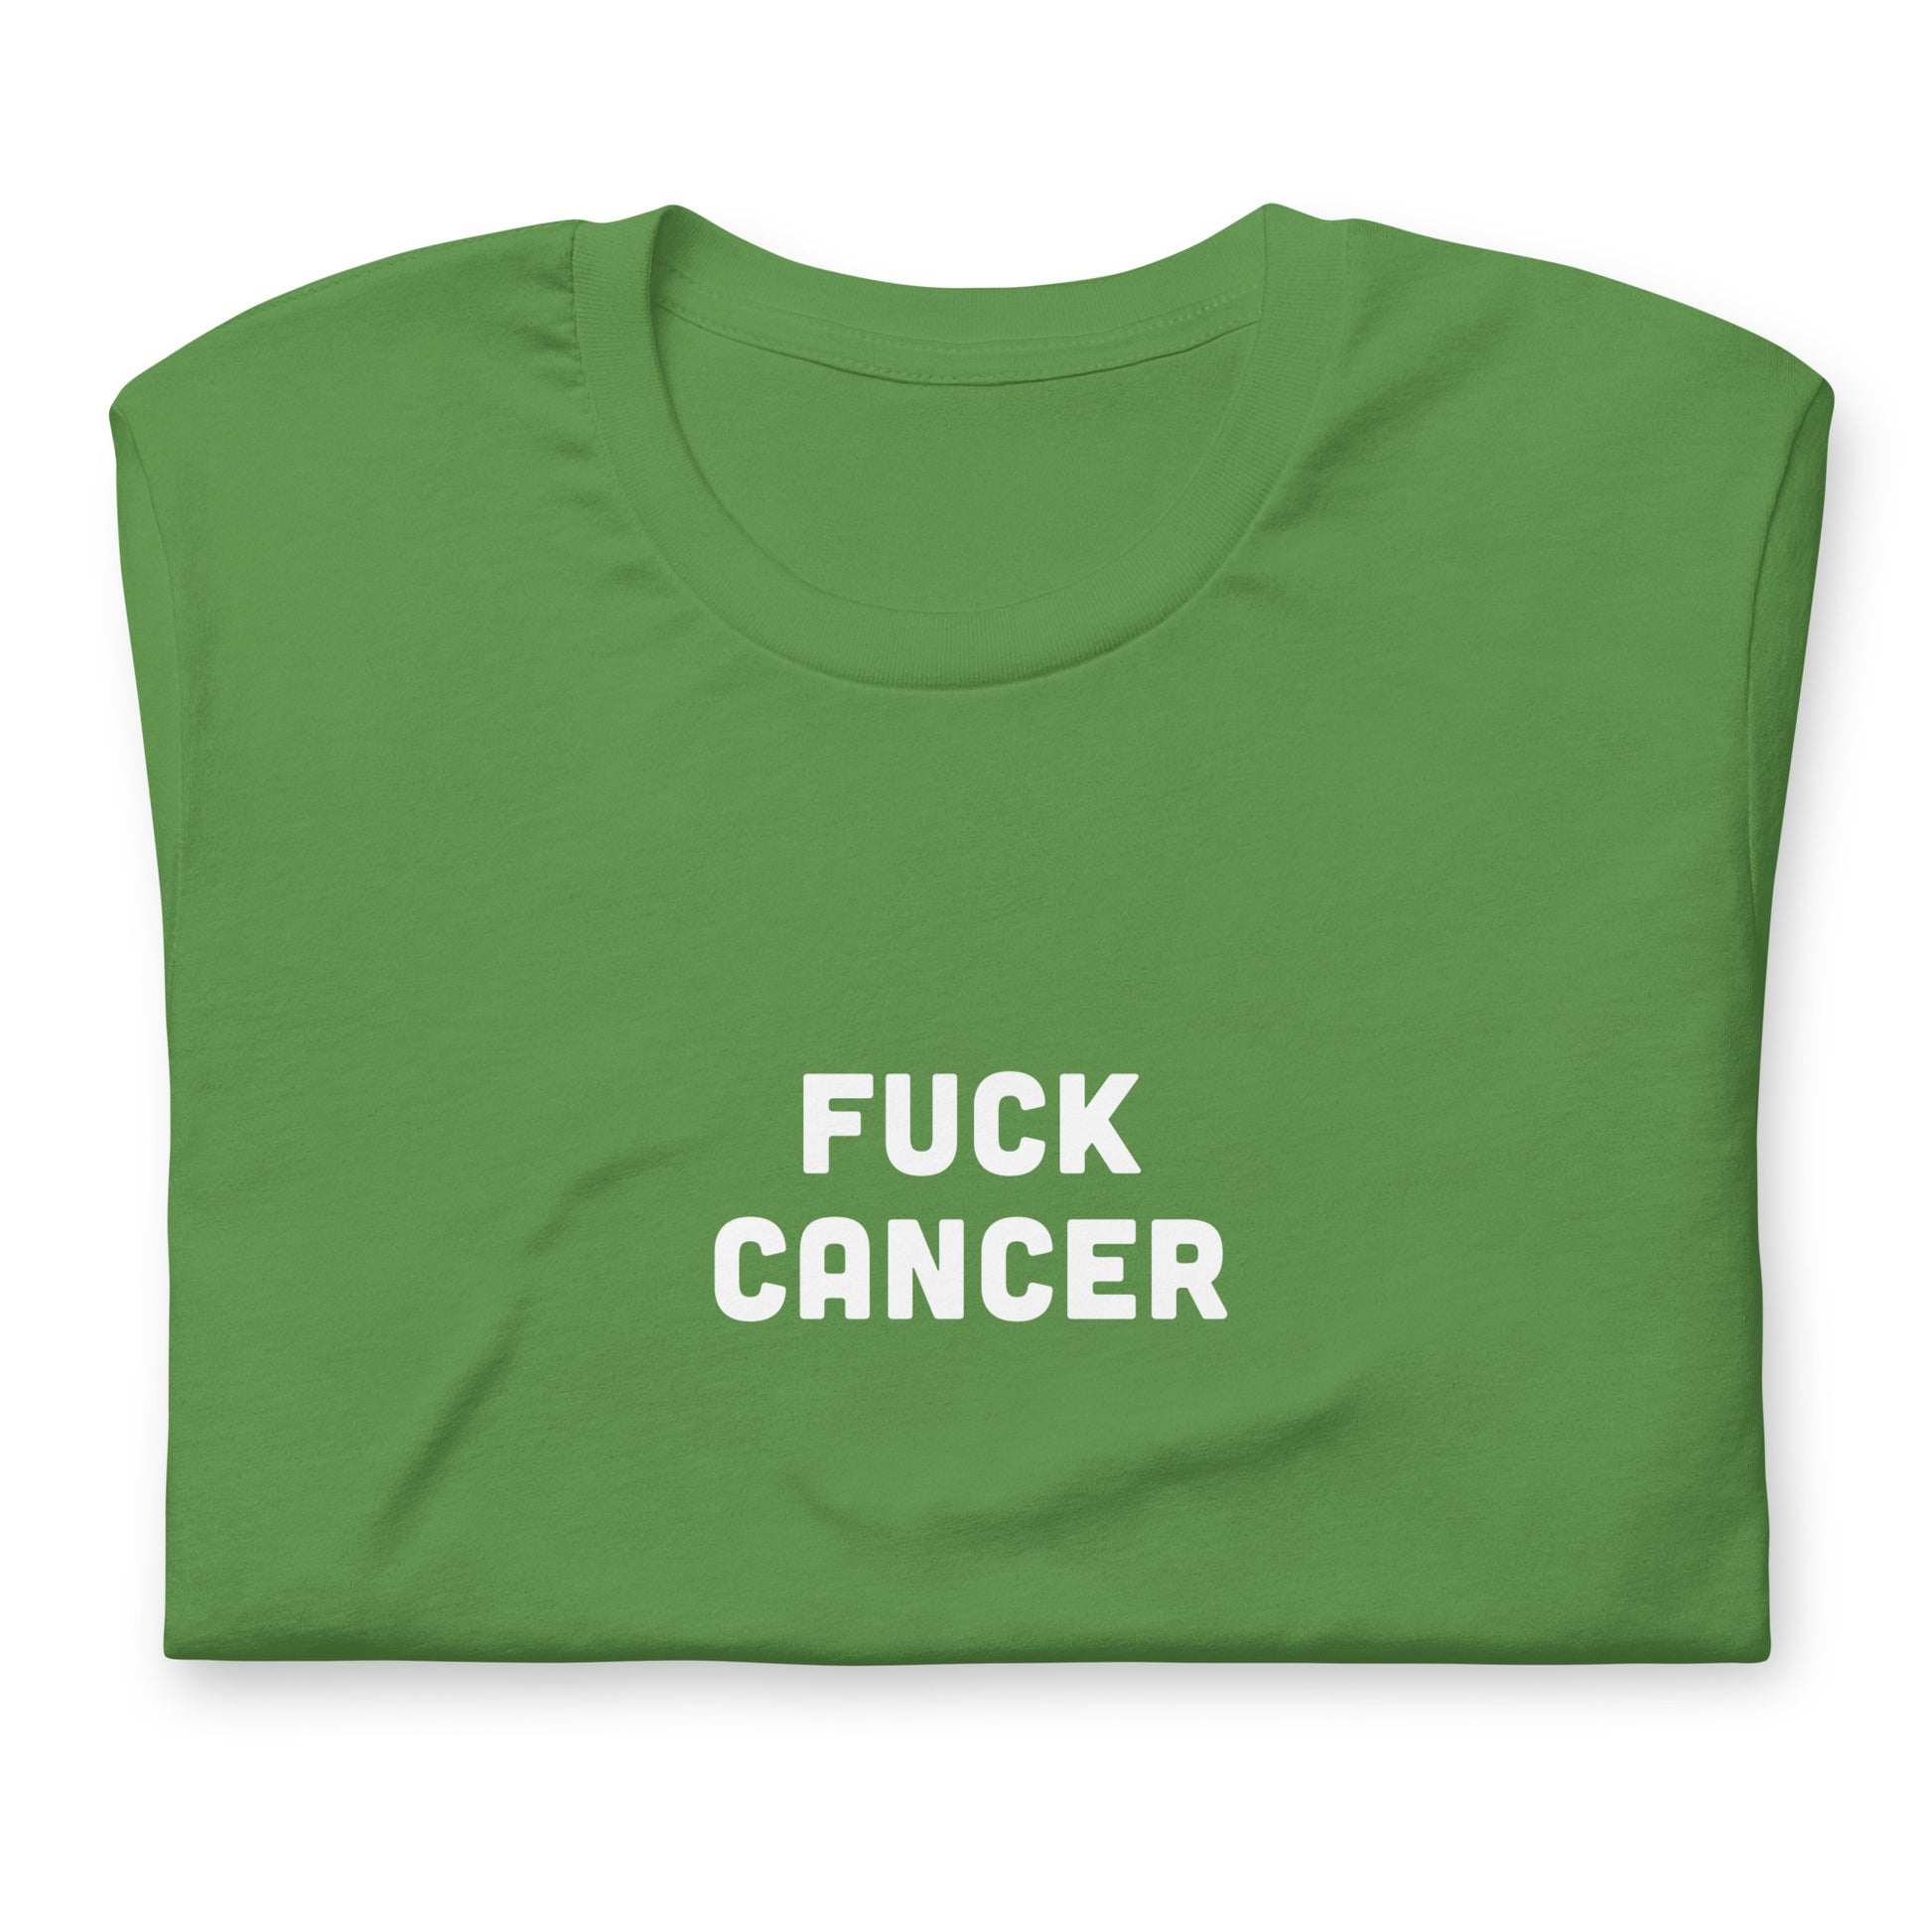 Fuck Cancer T-Shirt Size 2XL Color Navy